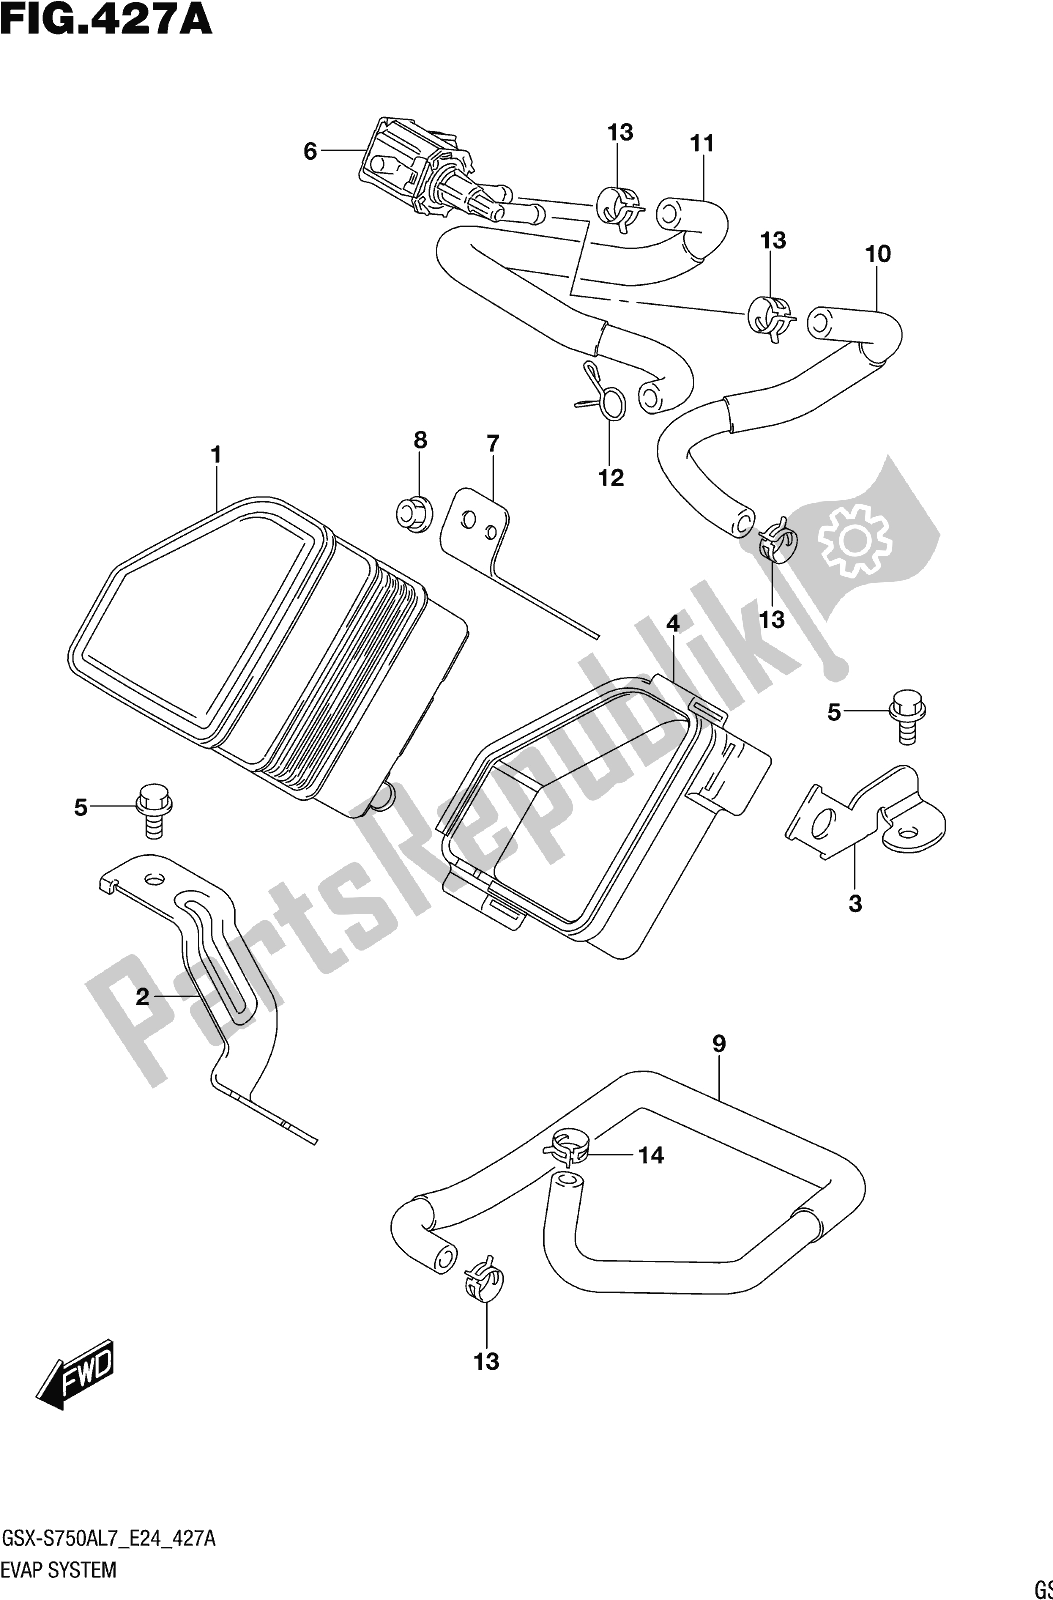 All parts for the Fig. 427a Evap System of the Suzuki Gsx-s 750 AZ 2017